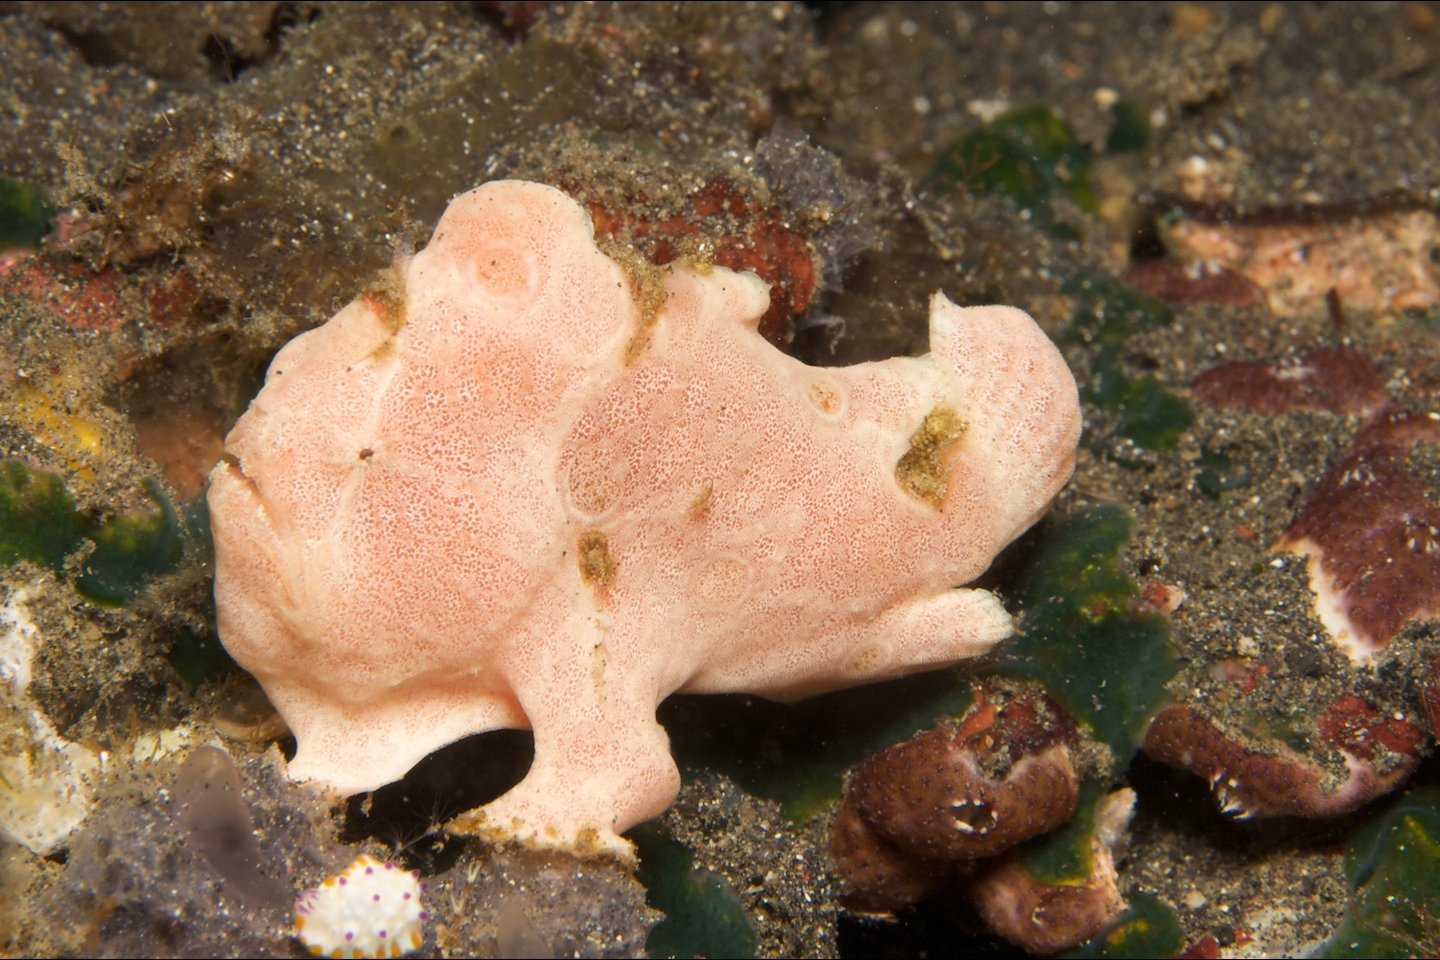 Commerson's frogfish